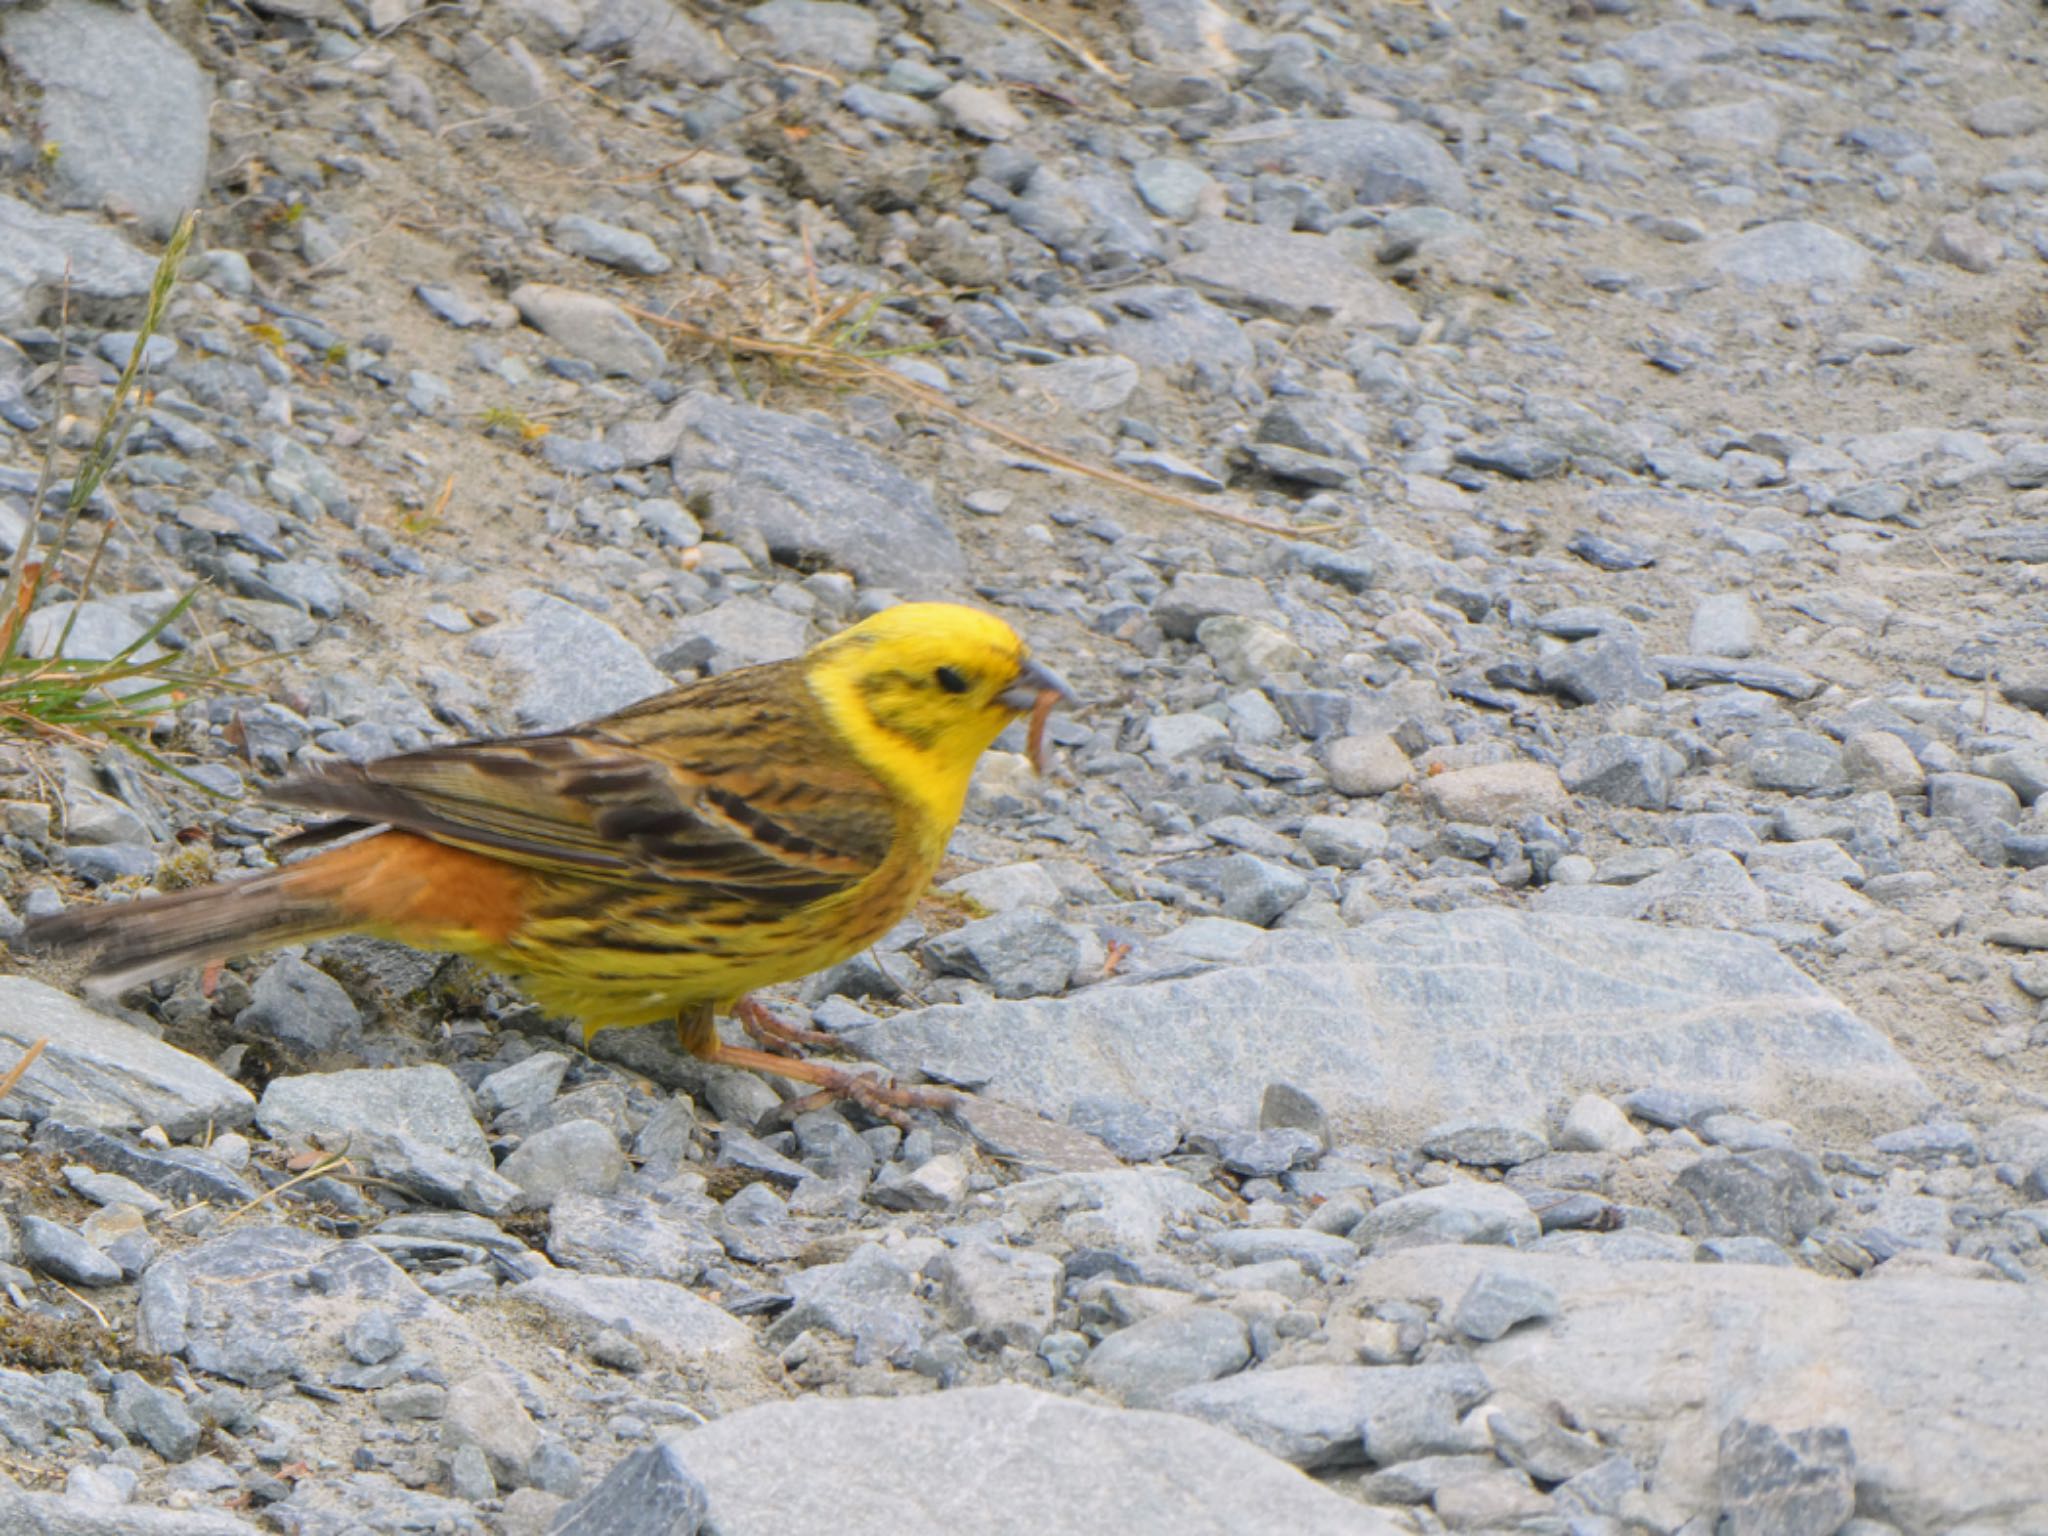 Photo of Yellowhammer at Hooker Valley Track, Aoraki/Mt Cook, New Zealand by Maki